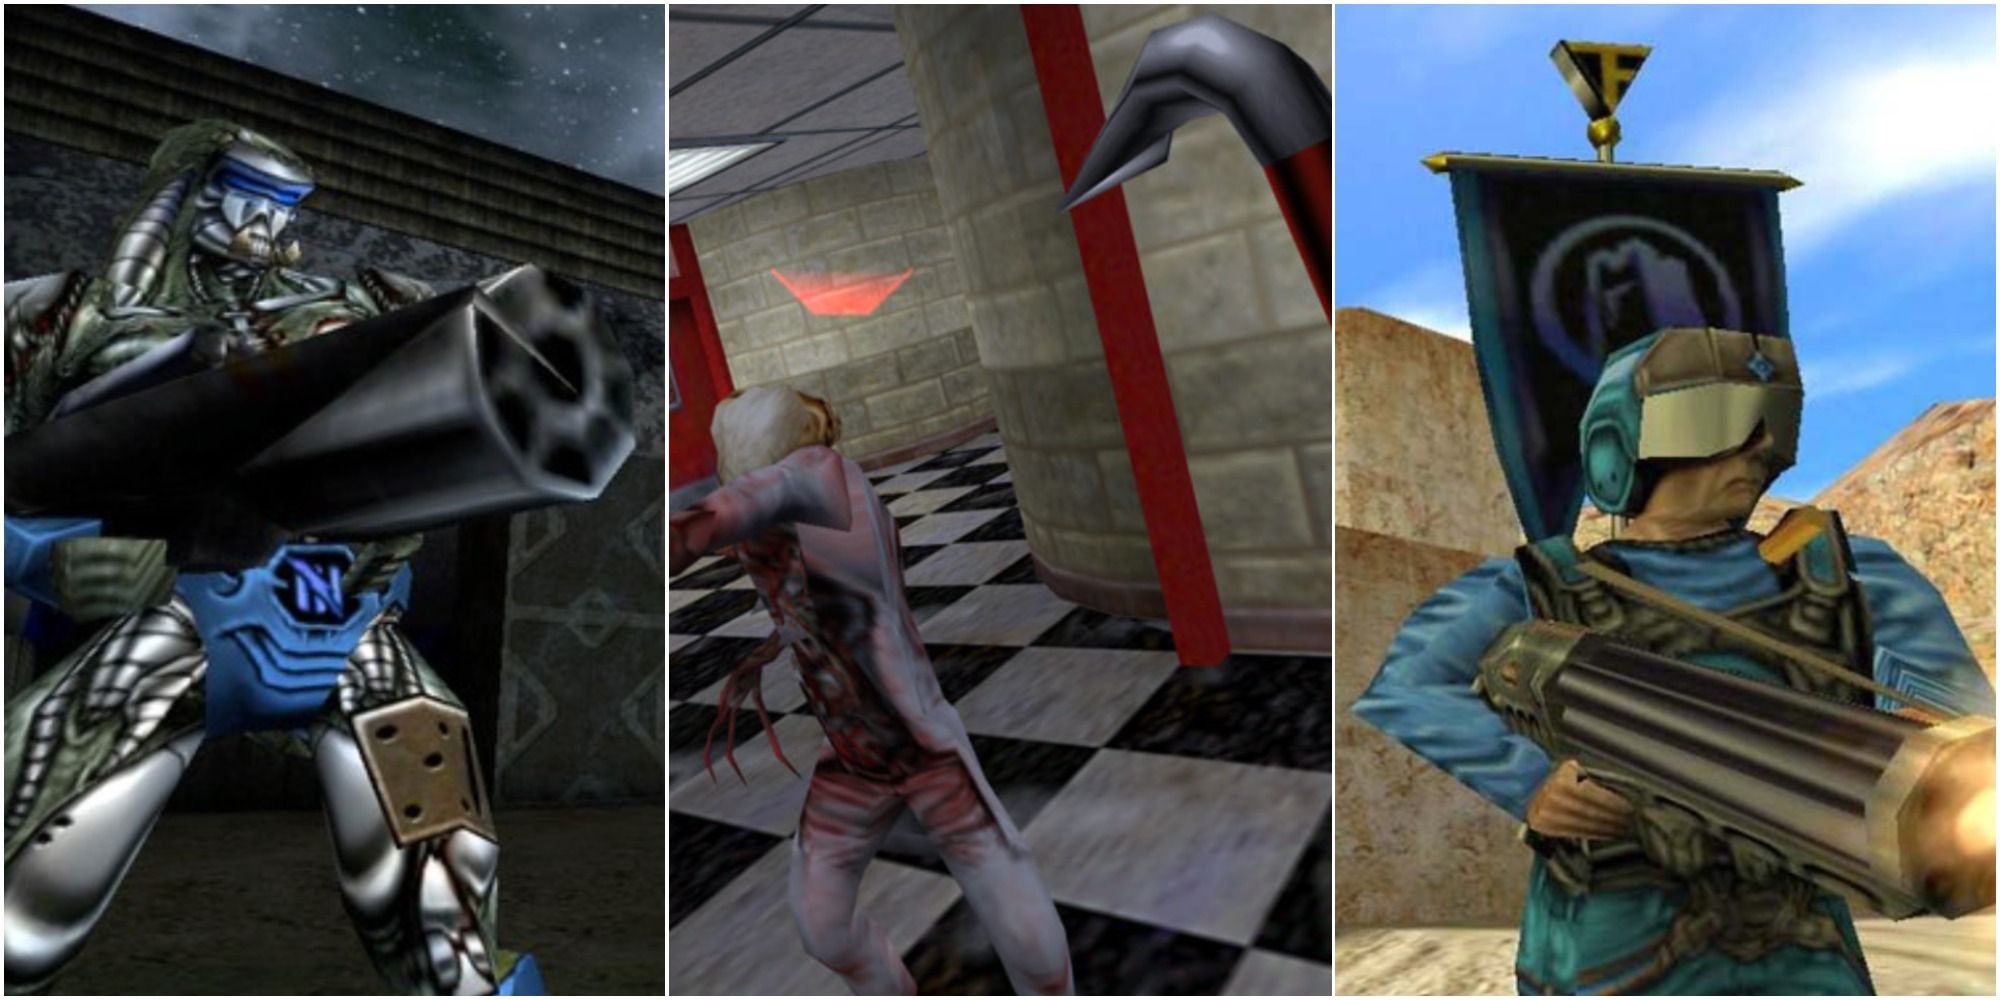 90s FPS on the left a Dominator from Unreal Tournament, in the middle a Zombie from Half Life and on the right a Soldier from Team Fortress Classic